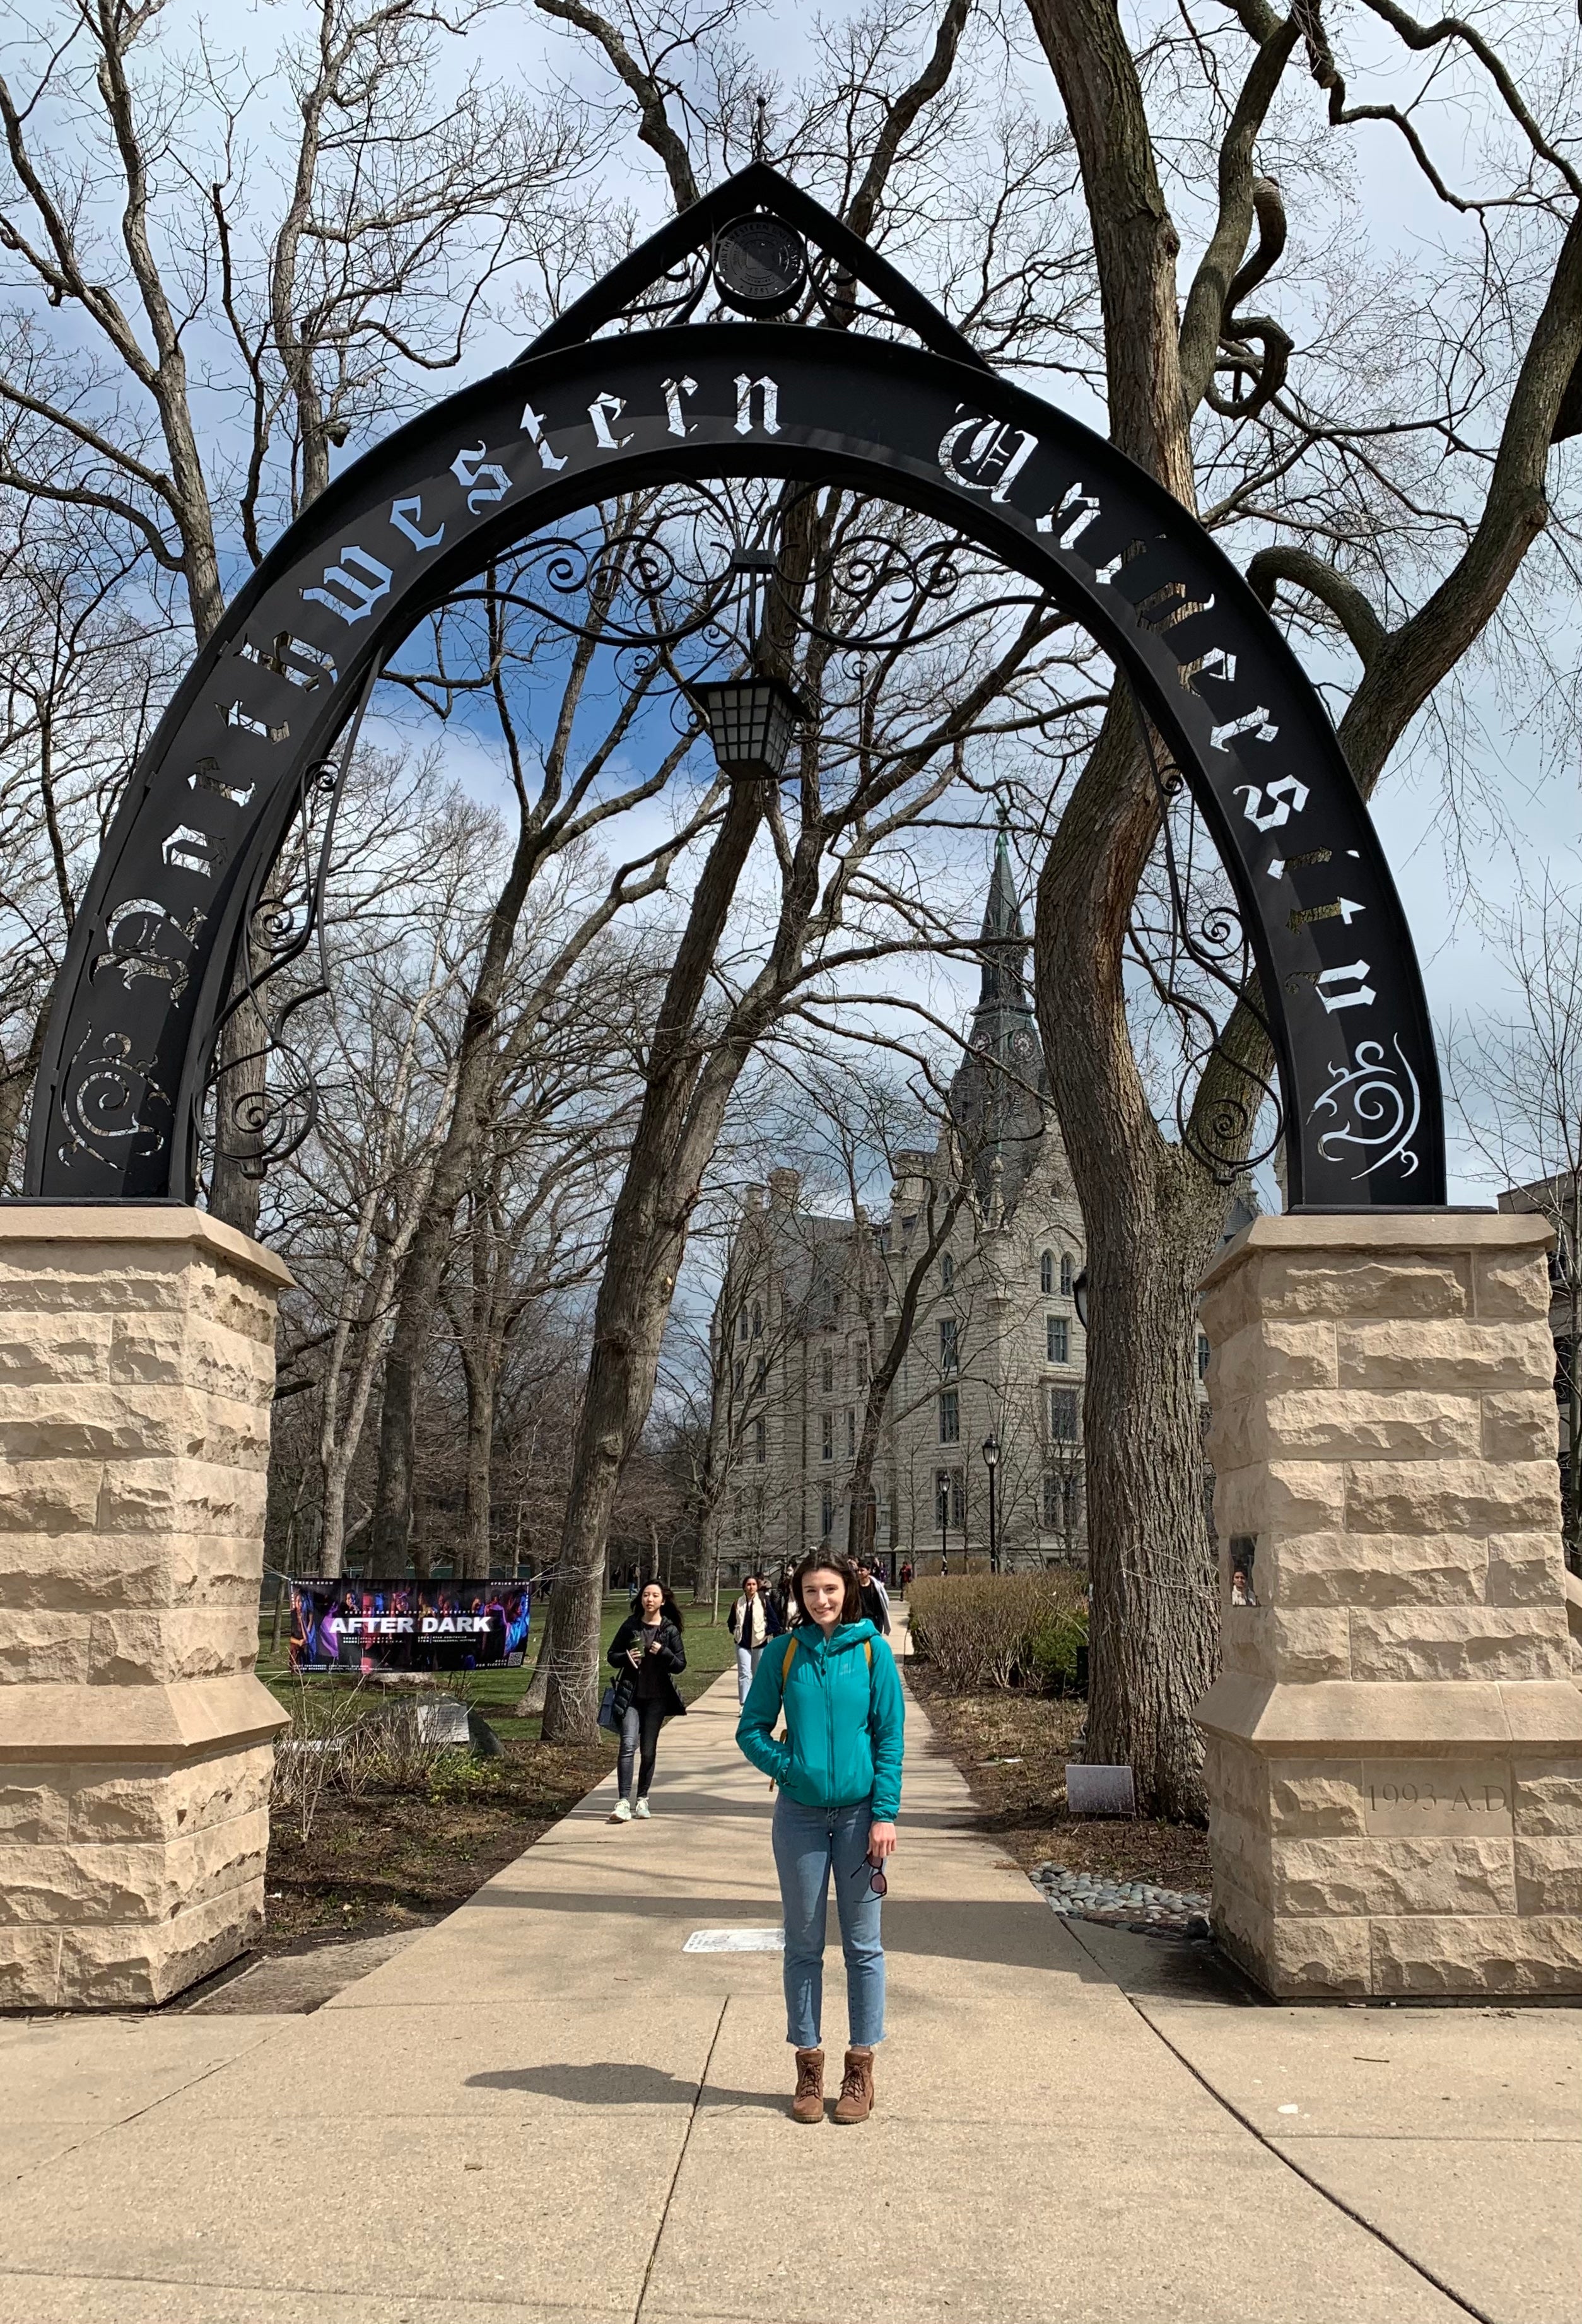 Megan stands in front of a stone and iron arch that reads "Northwestern University." It is a sunny day. She wears a light jacket and has one hand in her pocket while the other is at her side holding a pair of sunglasses. She is smiling.